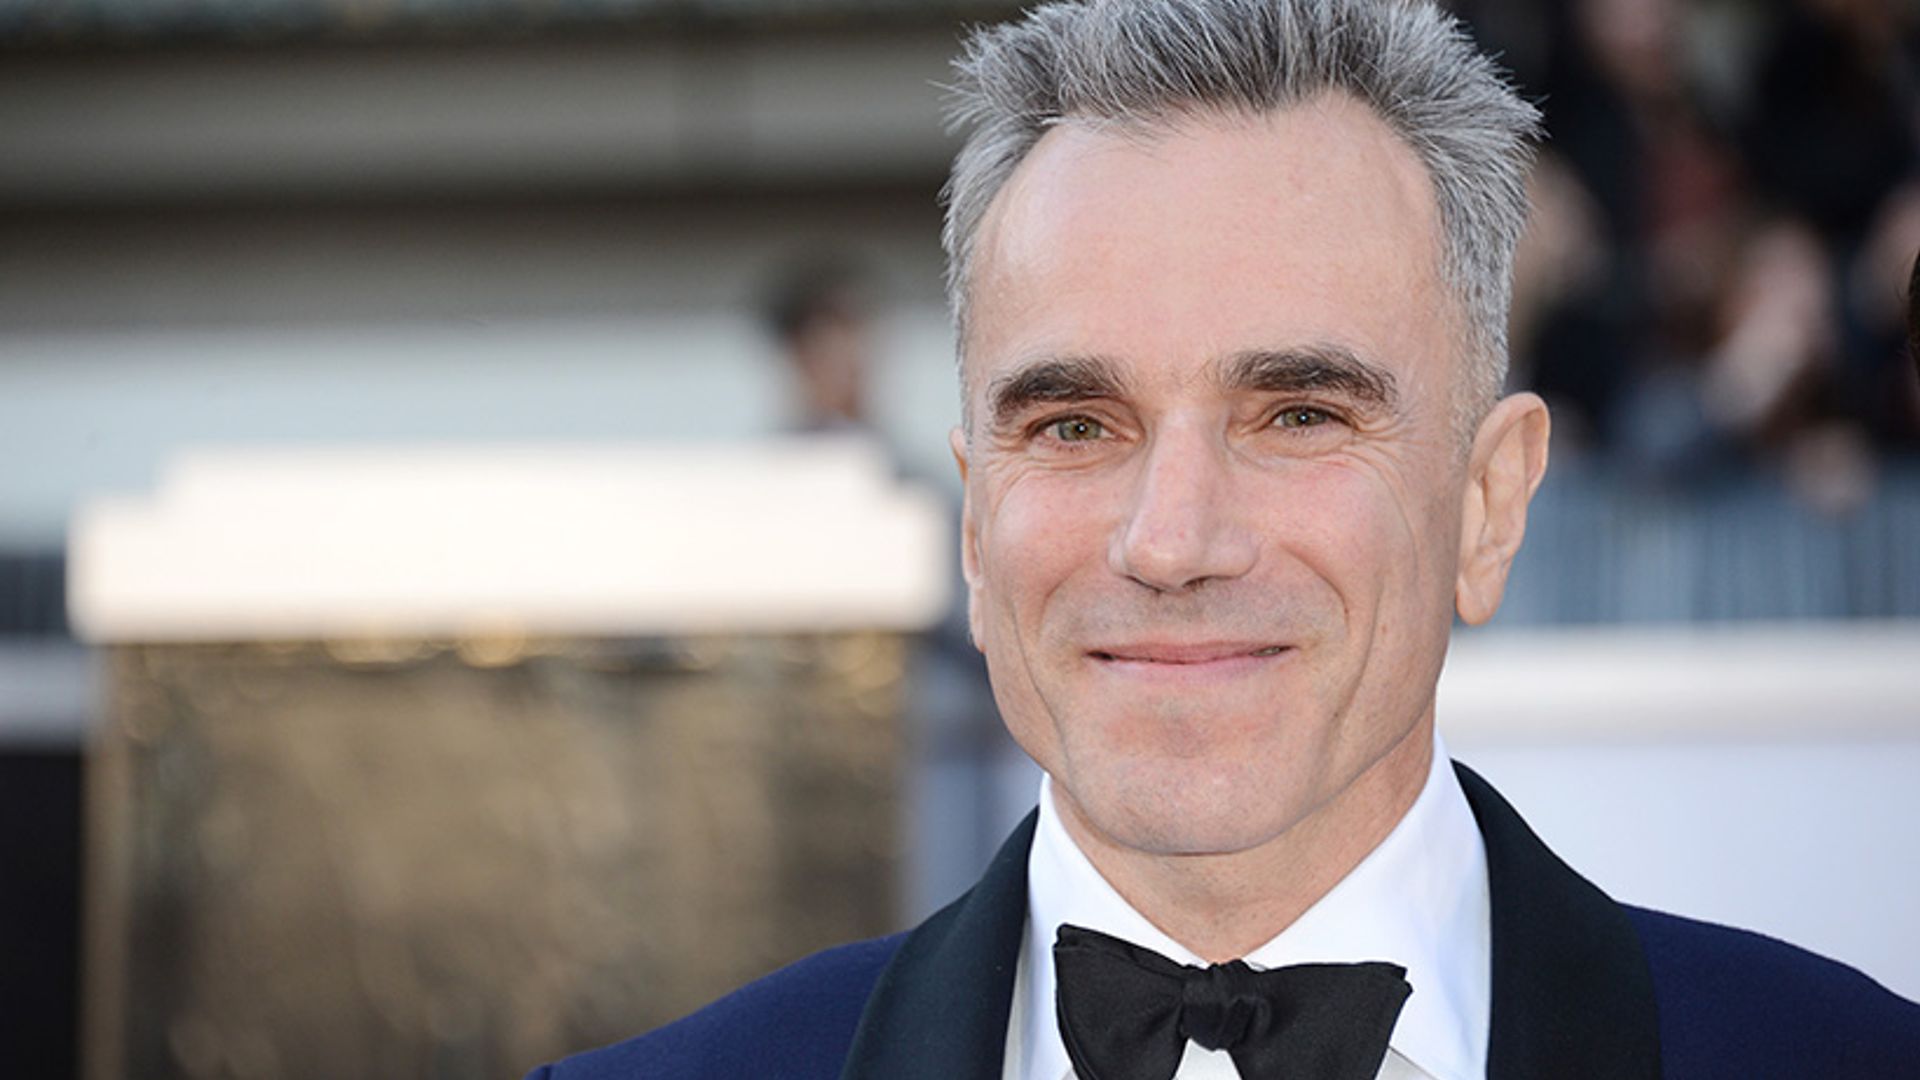 Daniel Day-Lewis announces his retirement from acting